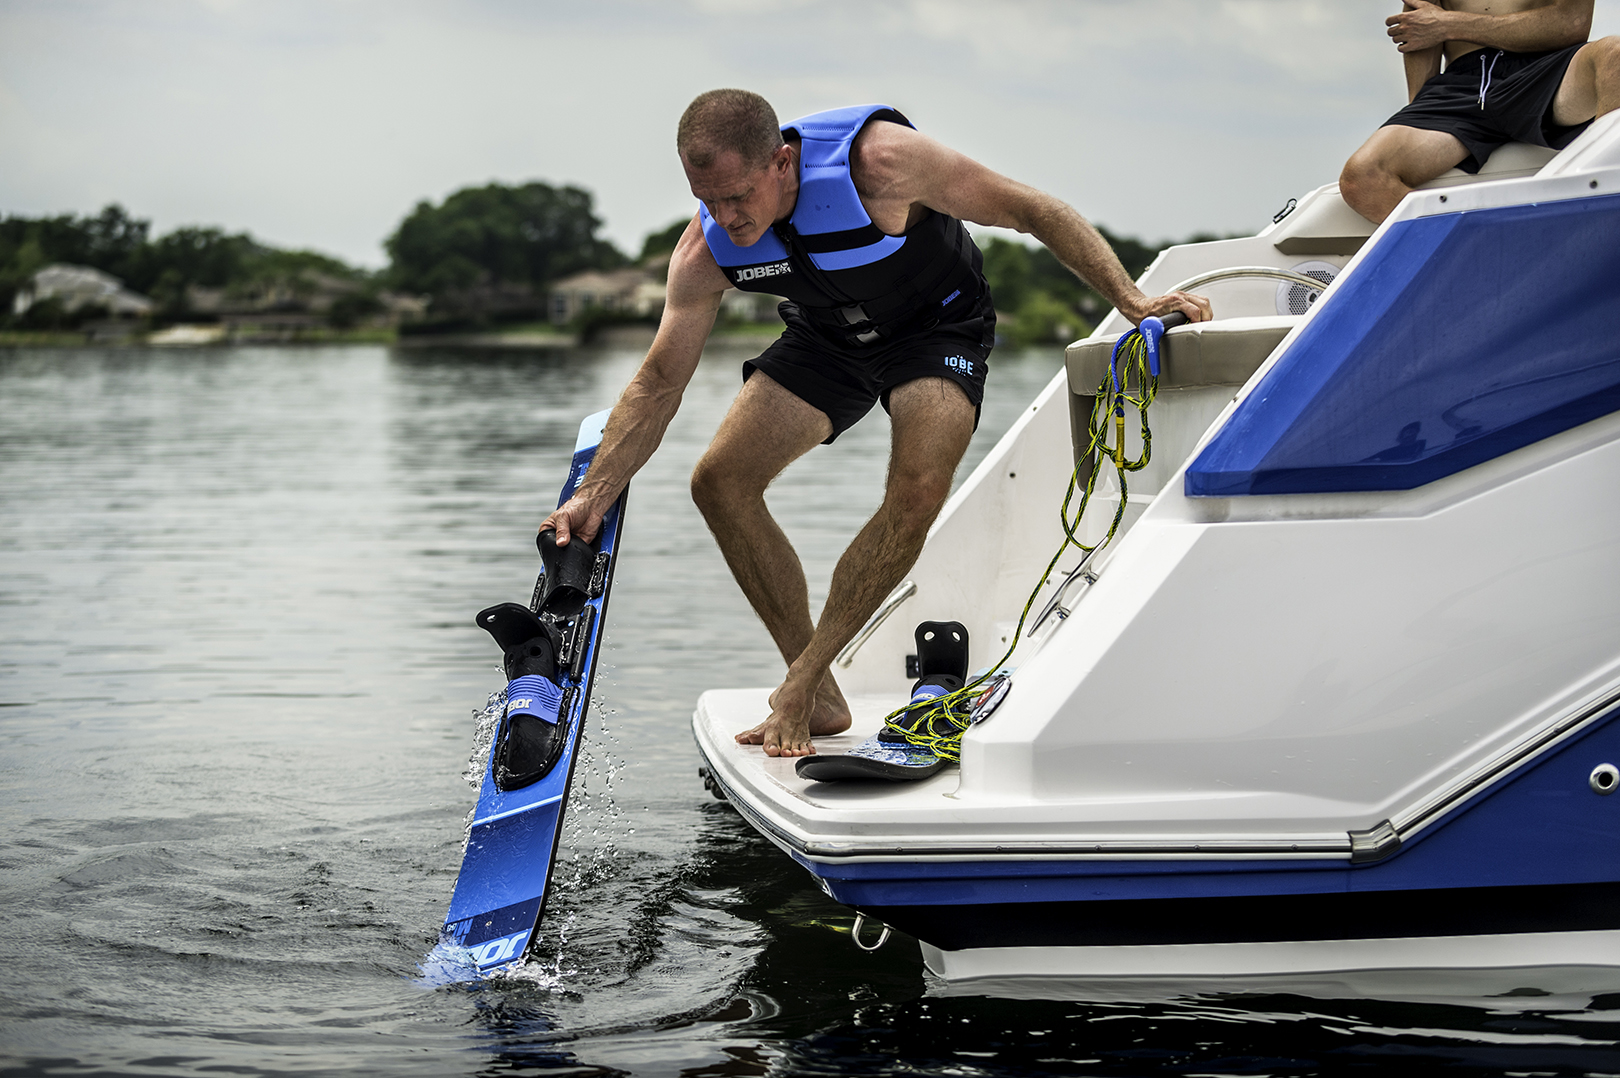 How-to-ski: The fundamentals of waterski